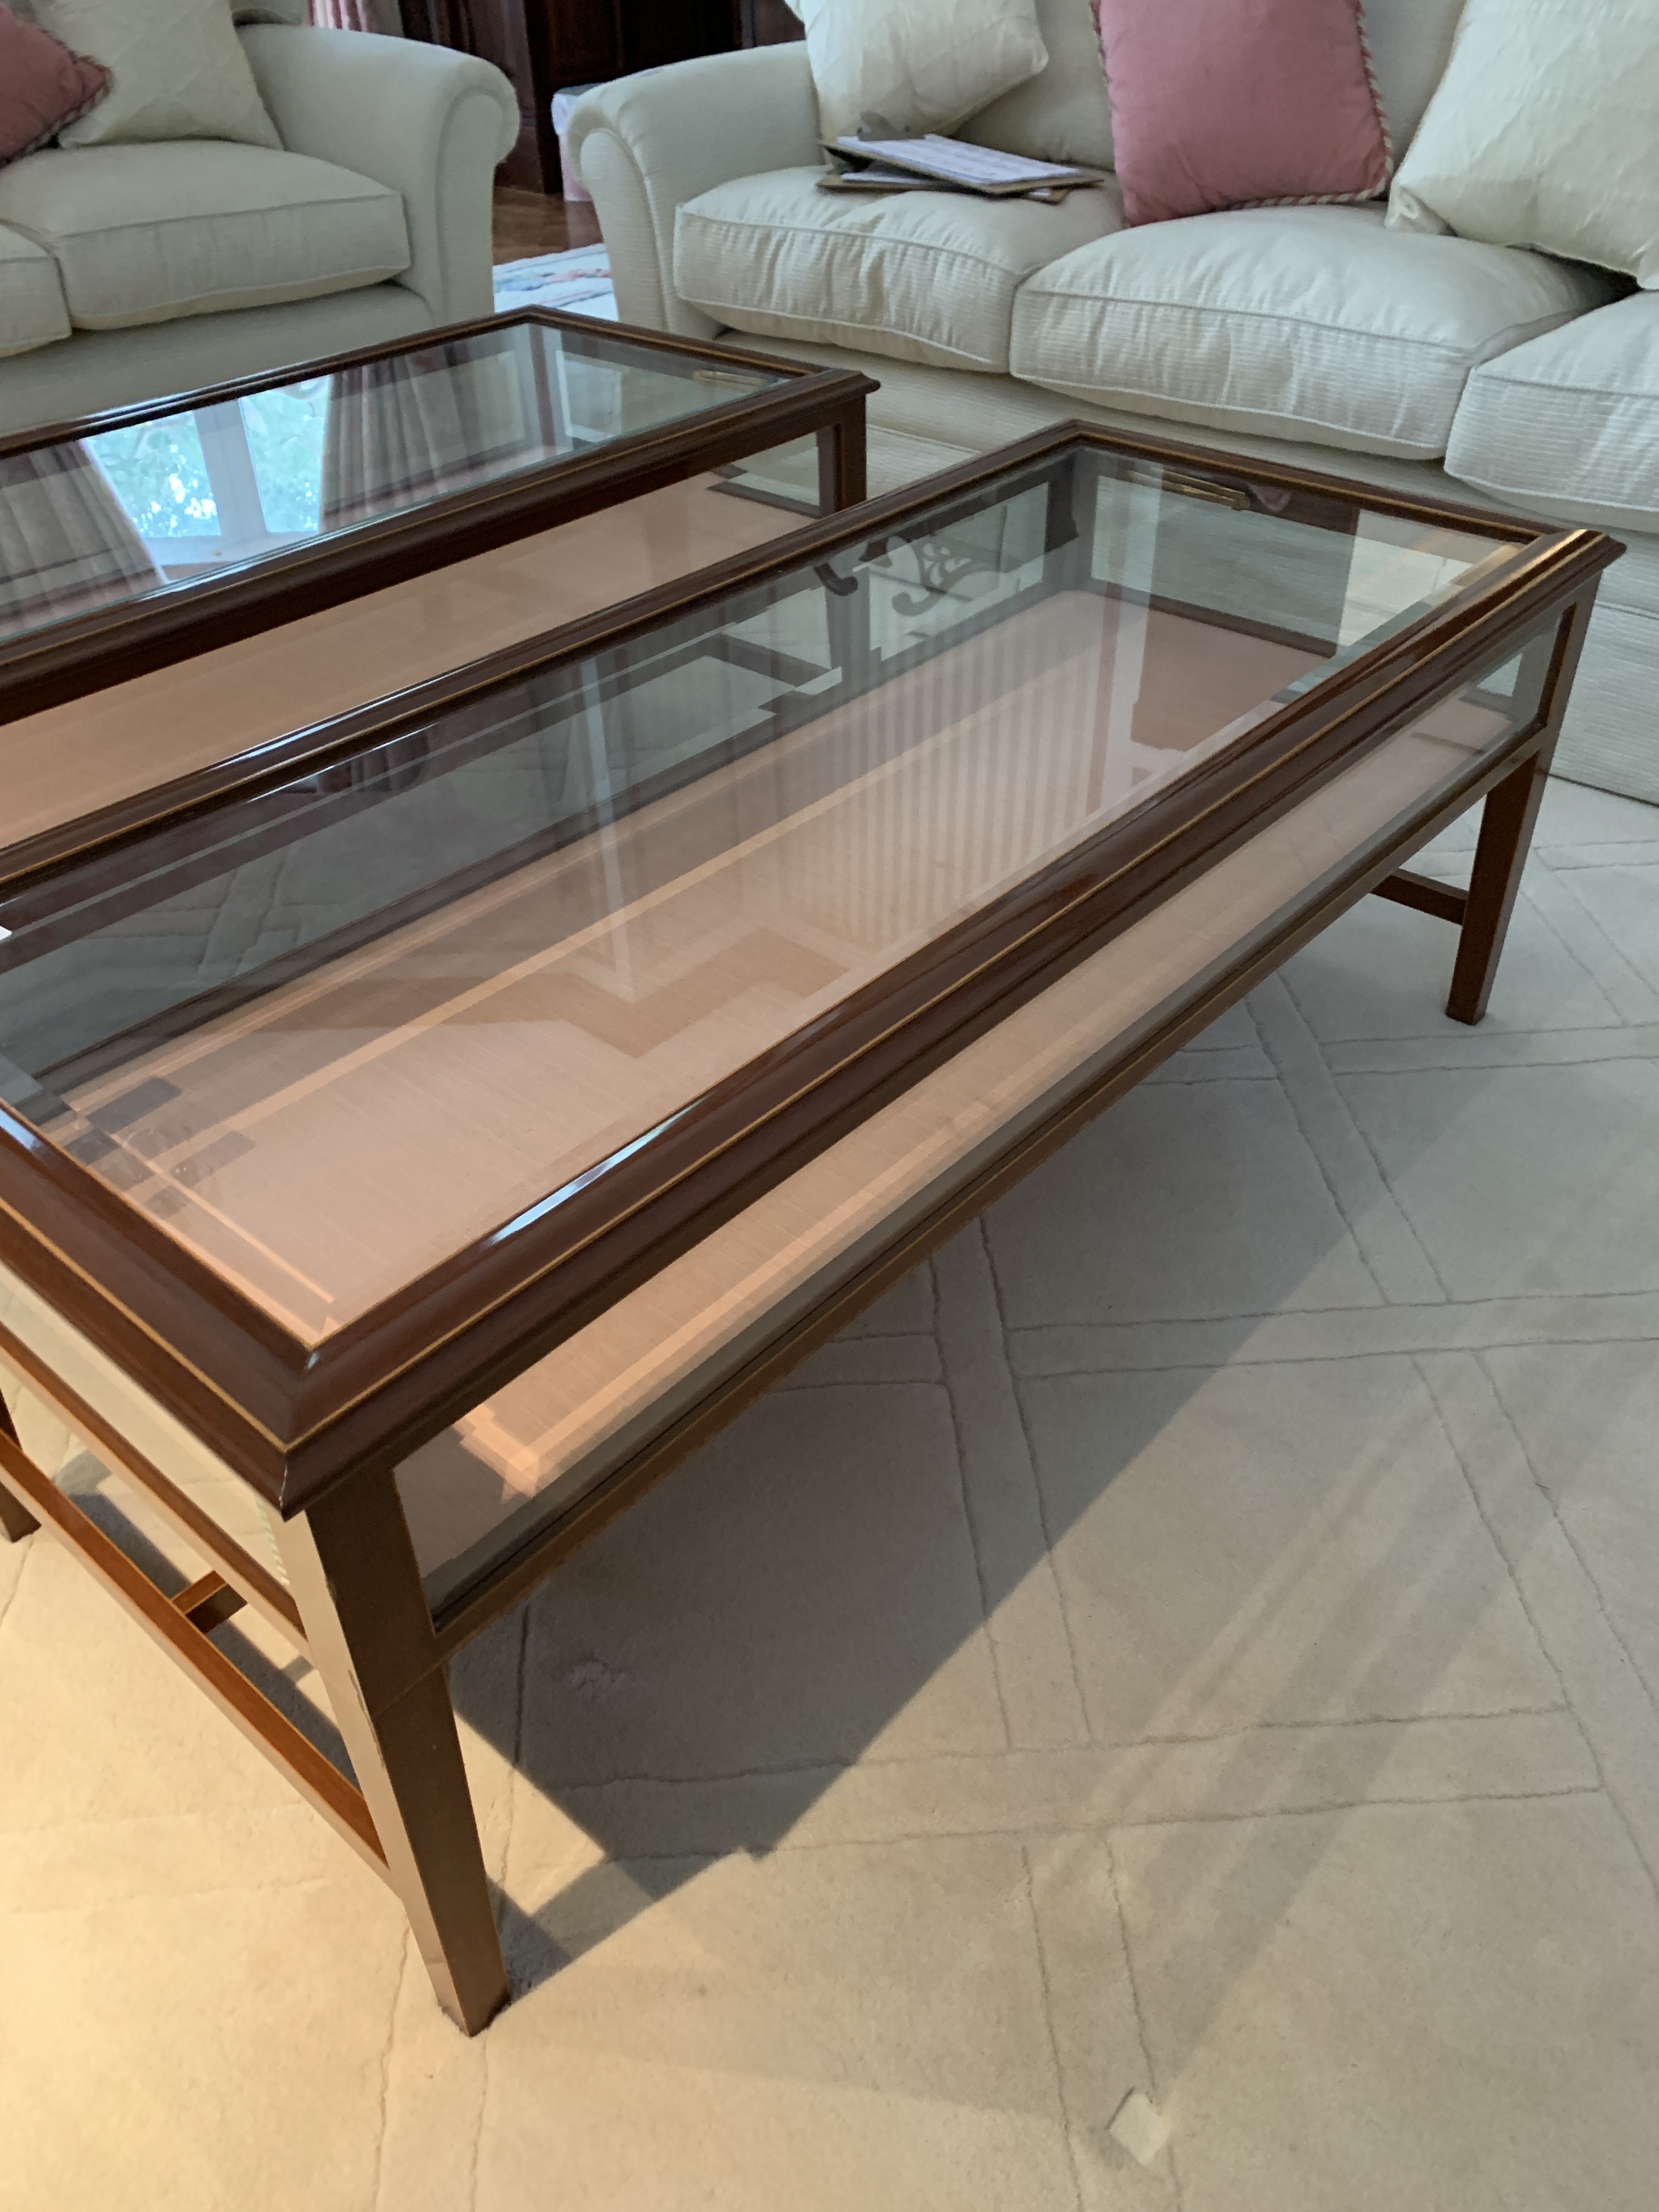 Rectangular display/coffee table with bevelled edge glass and rising lid - Image 3 of 4